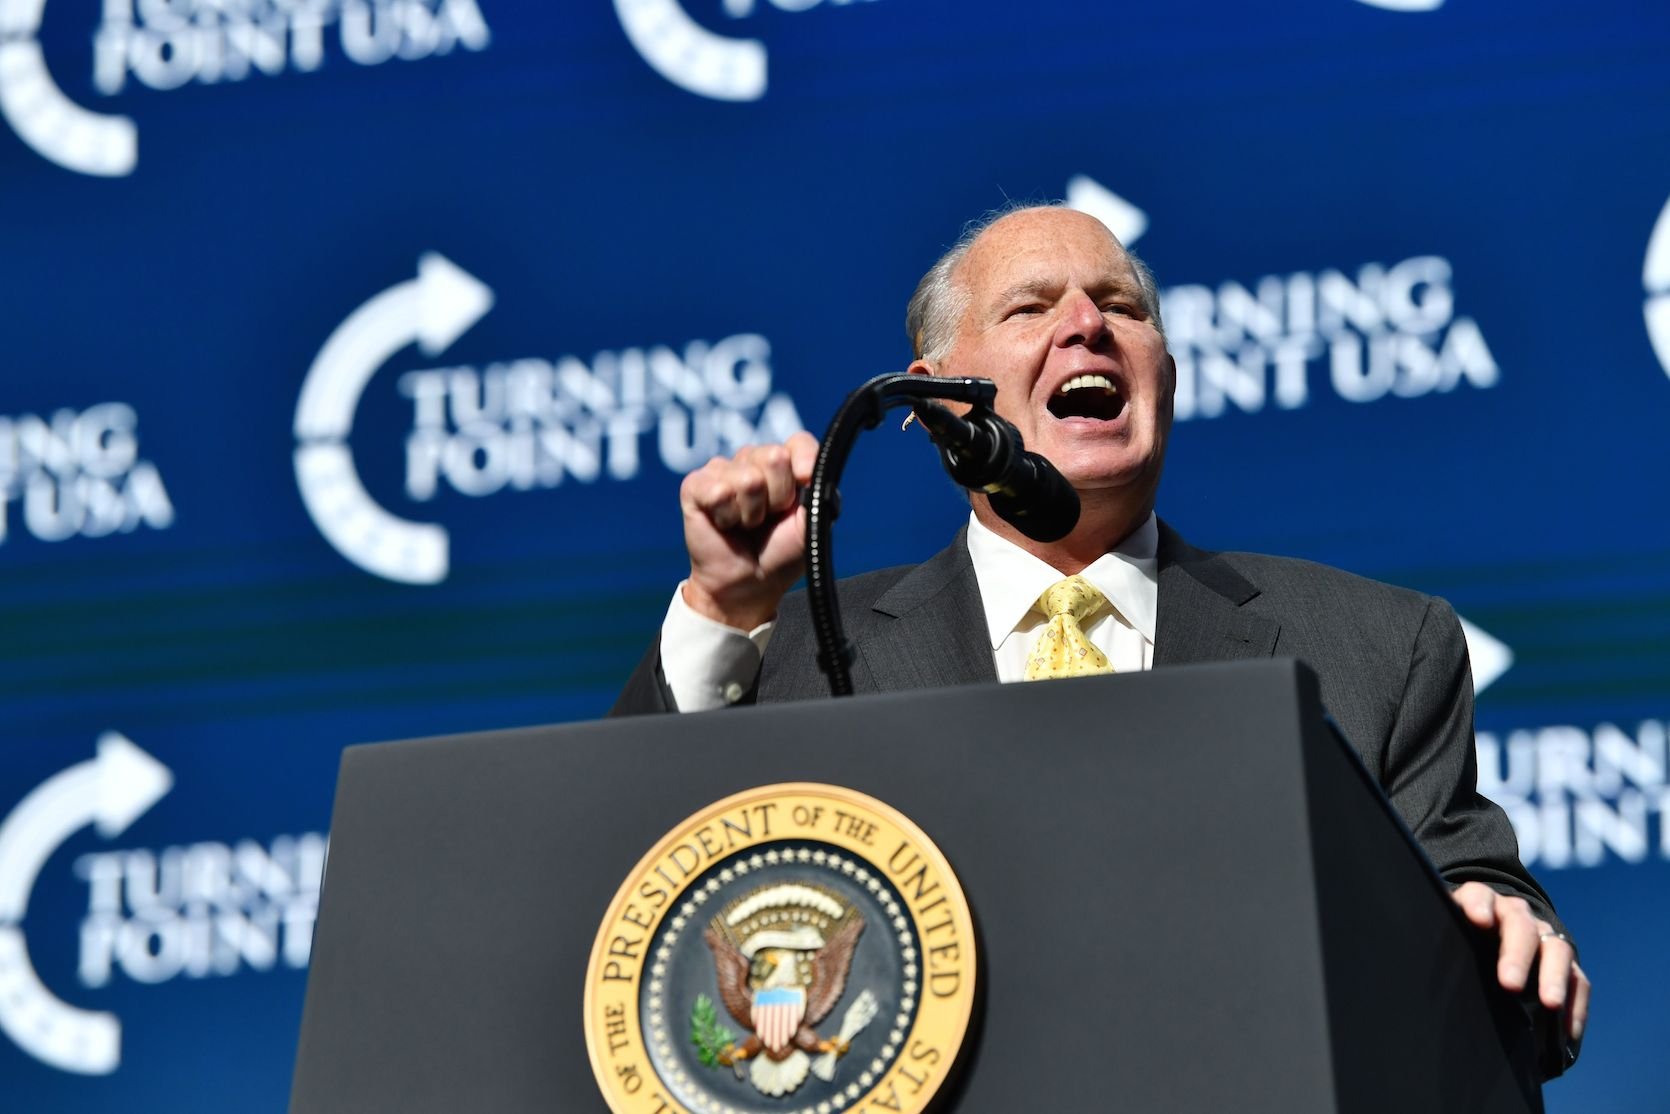 Rush Limbaugh shouting into a microphone at a summit